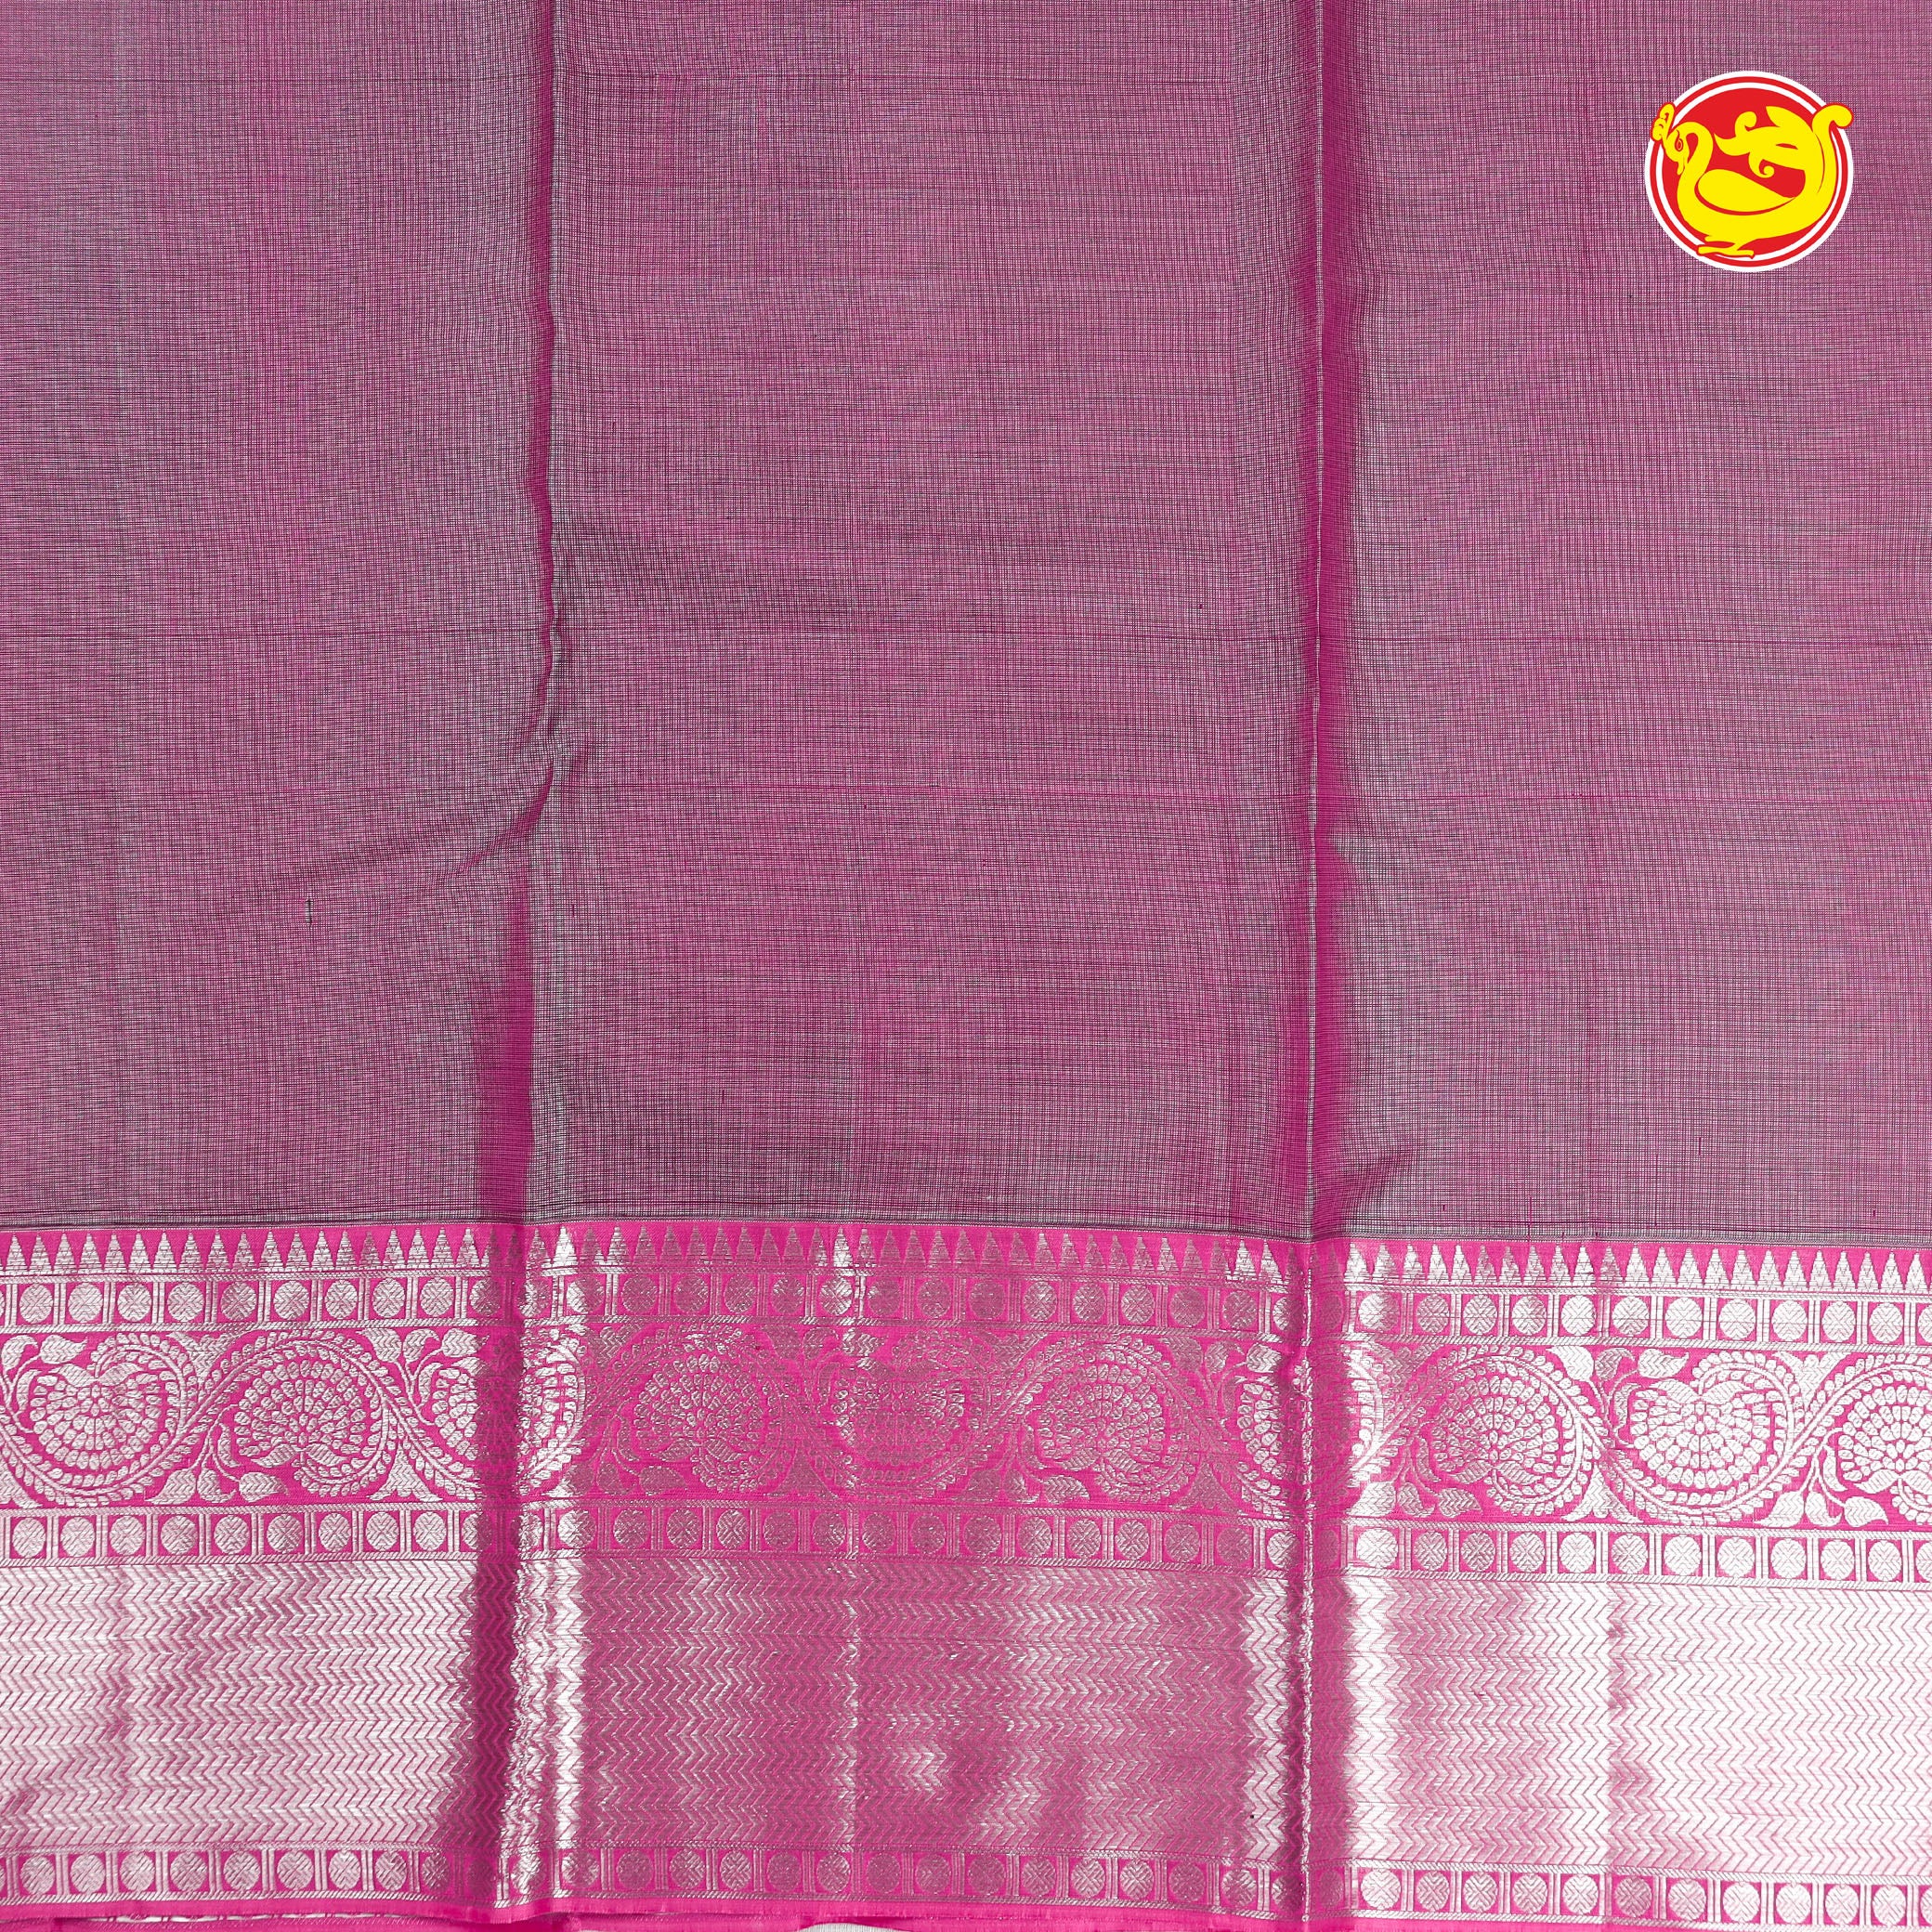 Elephant grey with pink pure silk saree with woven floral designs